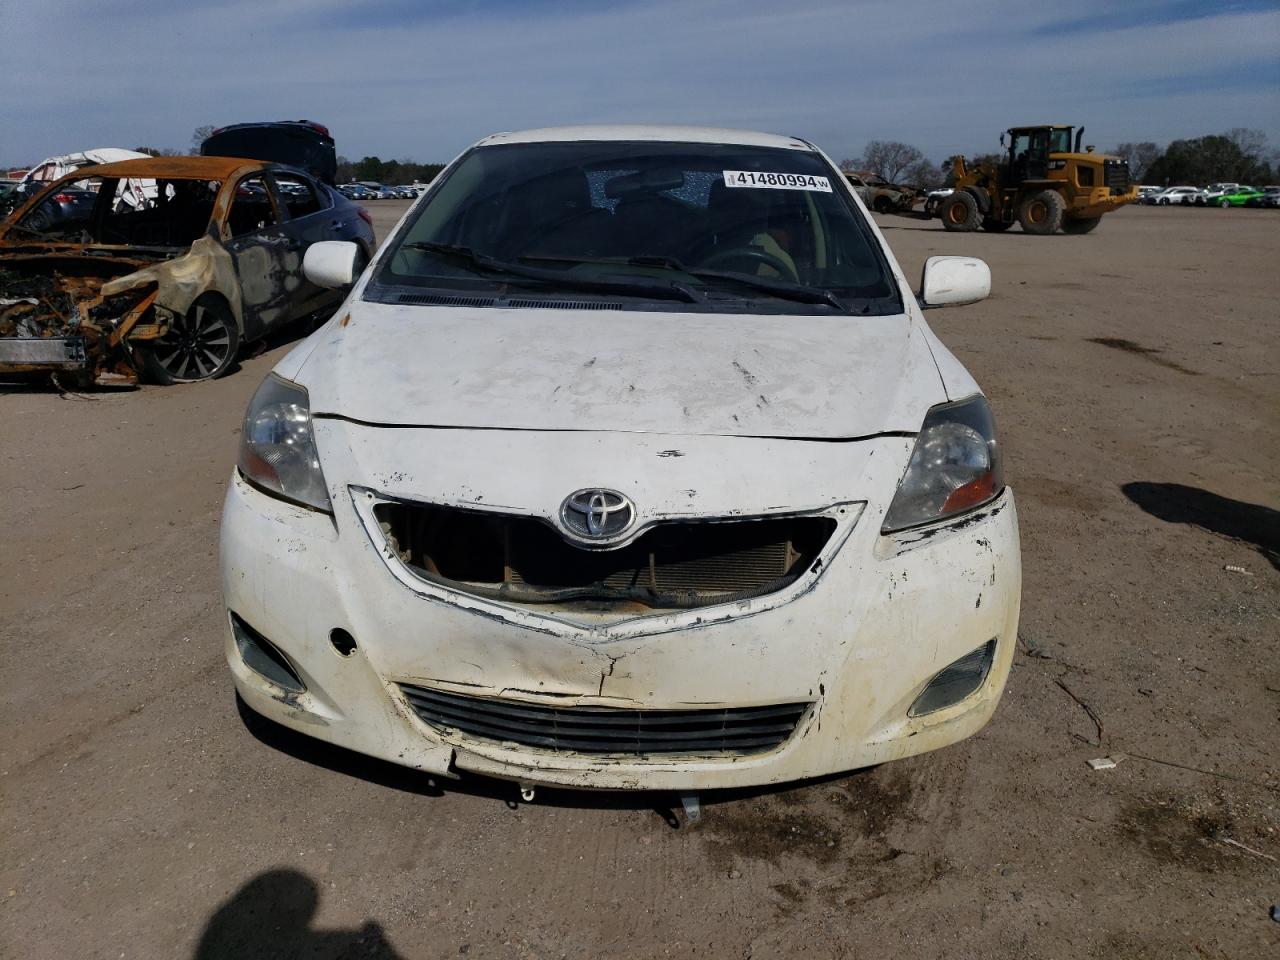 JTDBT923171****** Used and Repairable 2007 Toyota Yaris in Alabama State